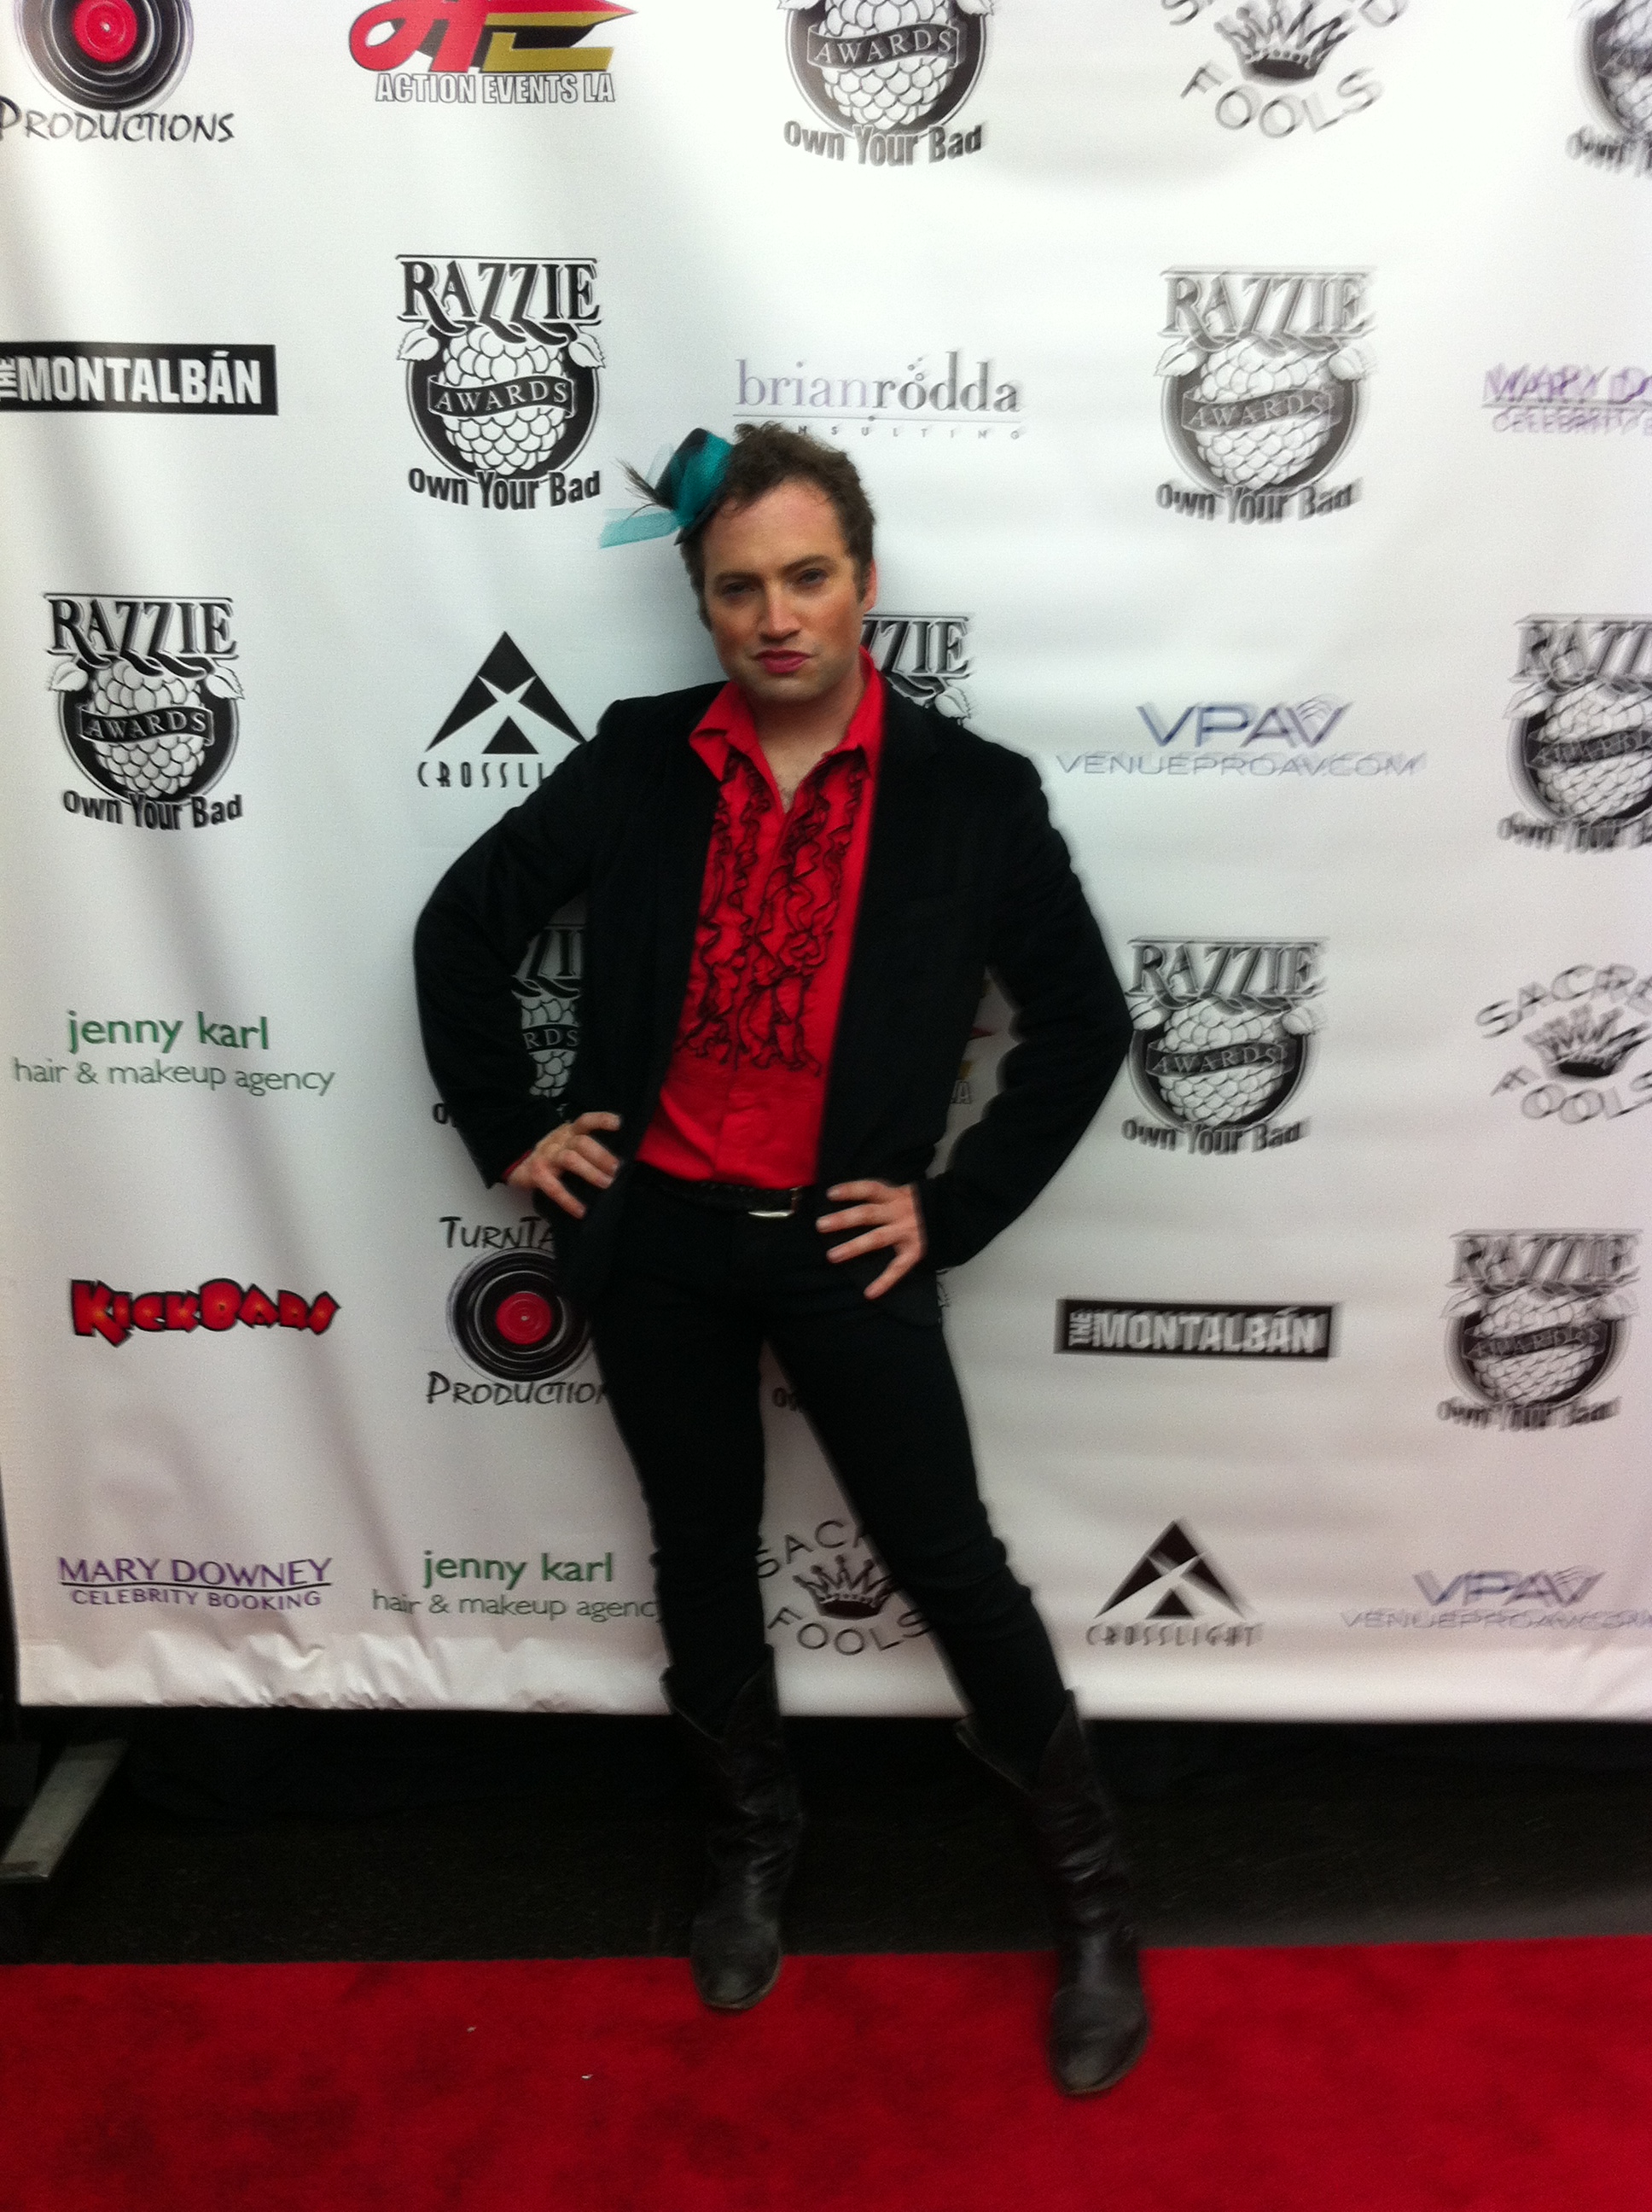 Amir Levi on the red carpet for the Razzies 2015